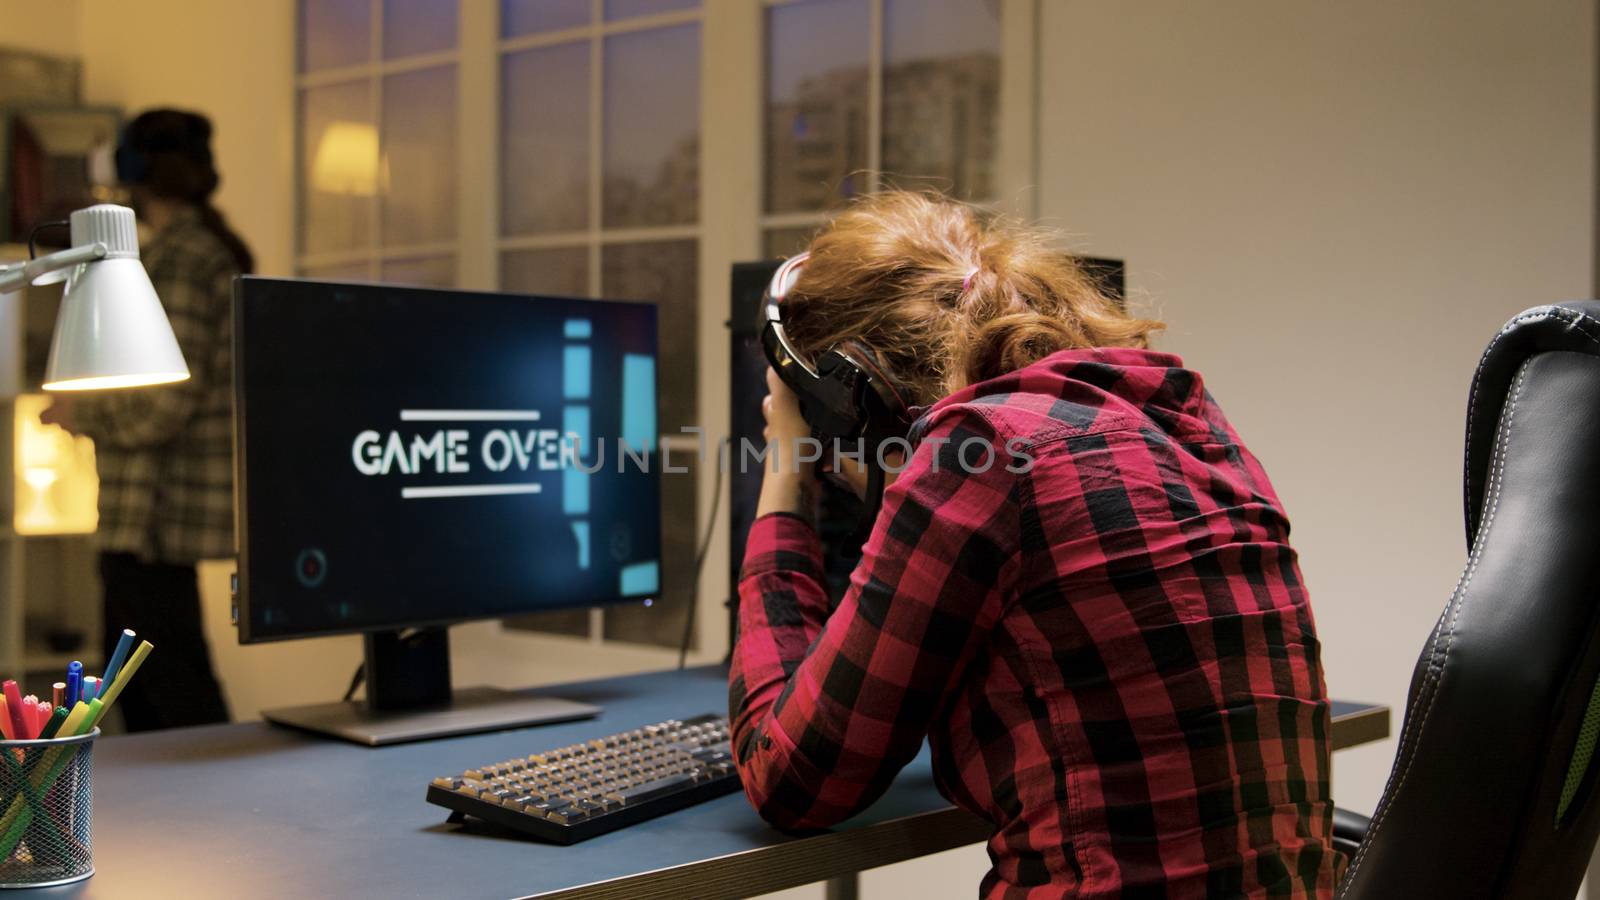 Game over for a professional caucasian female gamer by DCStudio